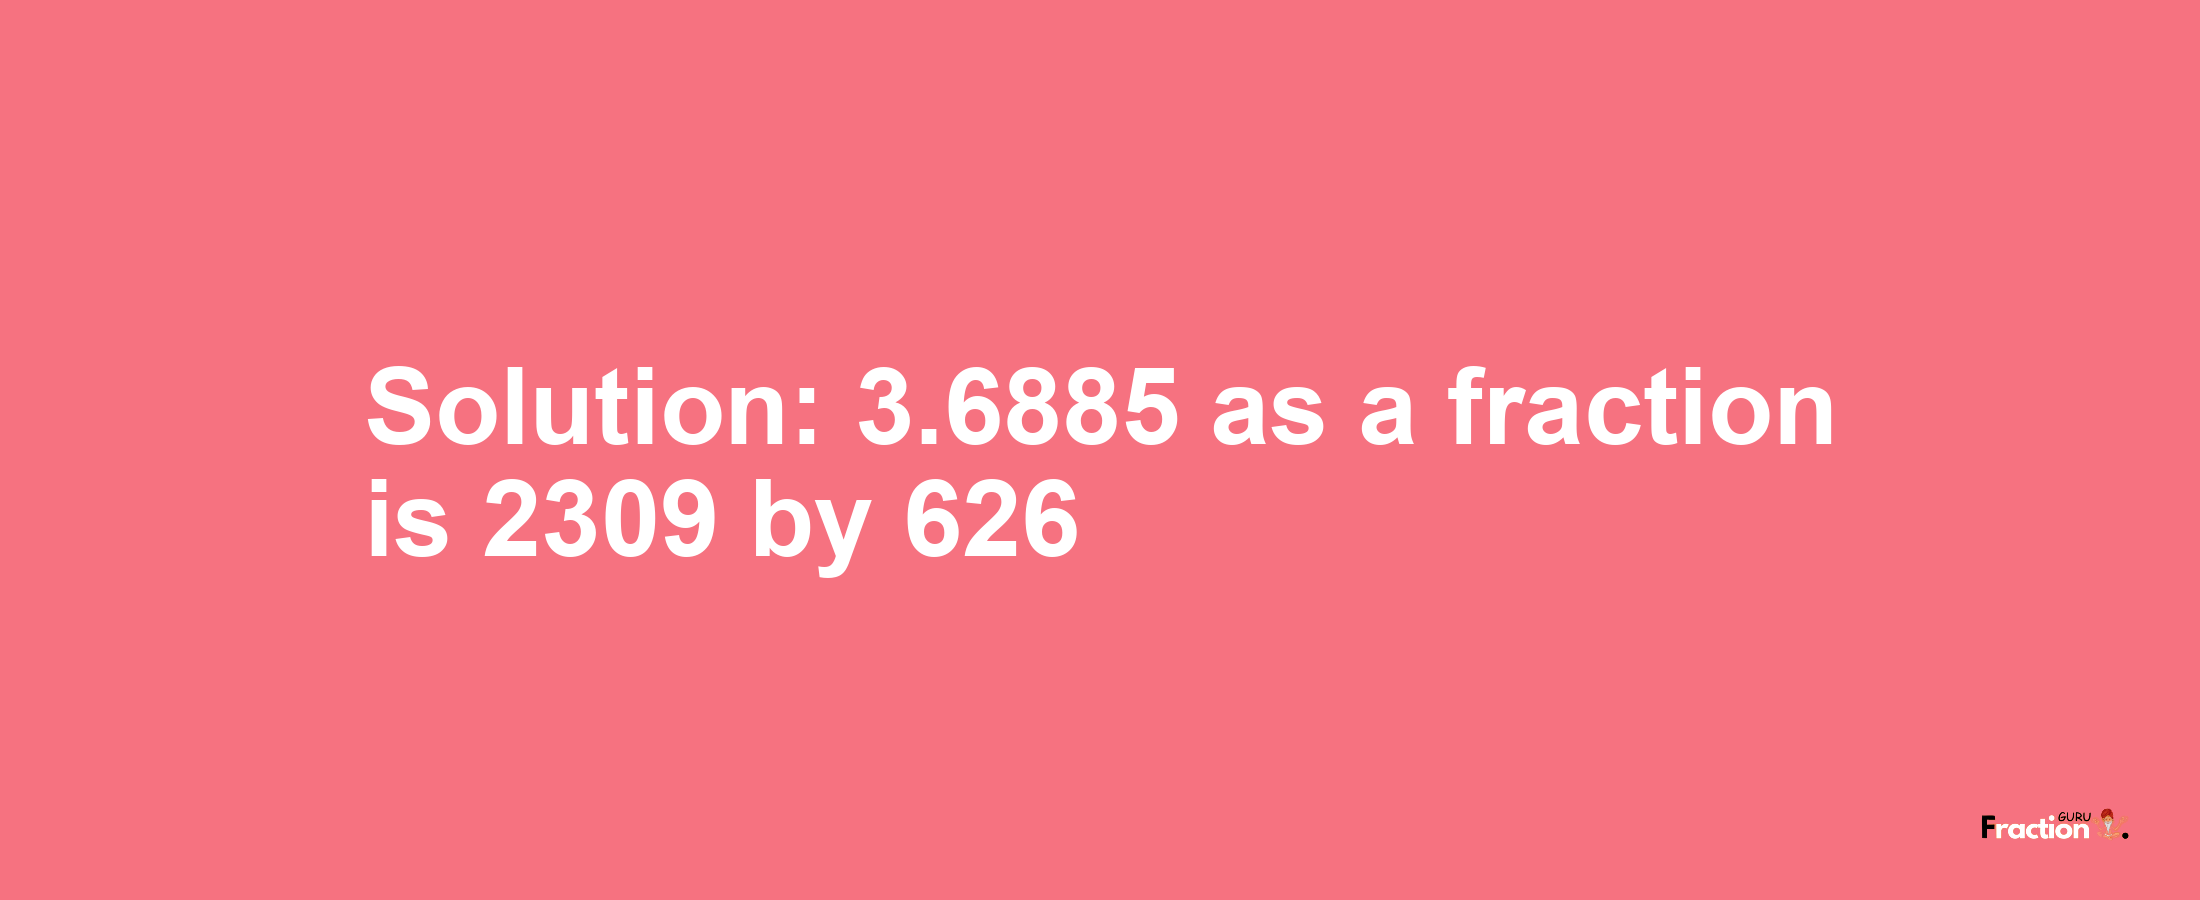 Solution:3.6885 as a fraction is 2309/626